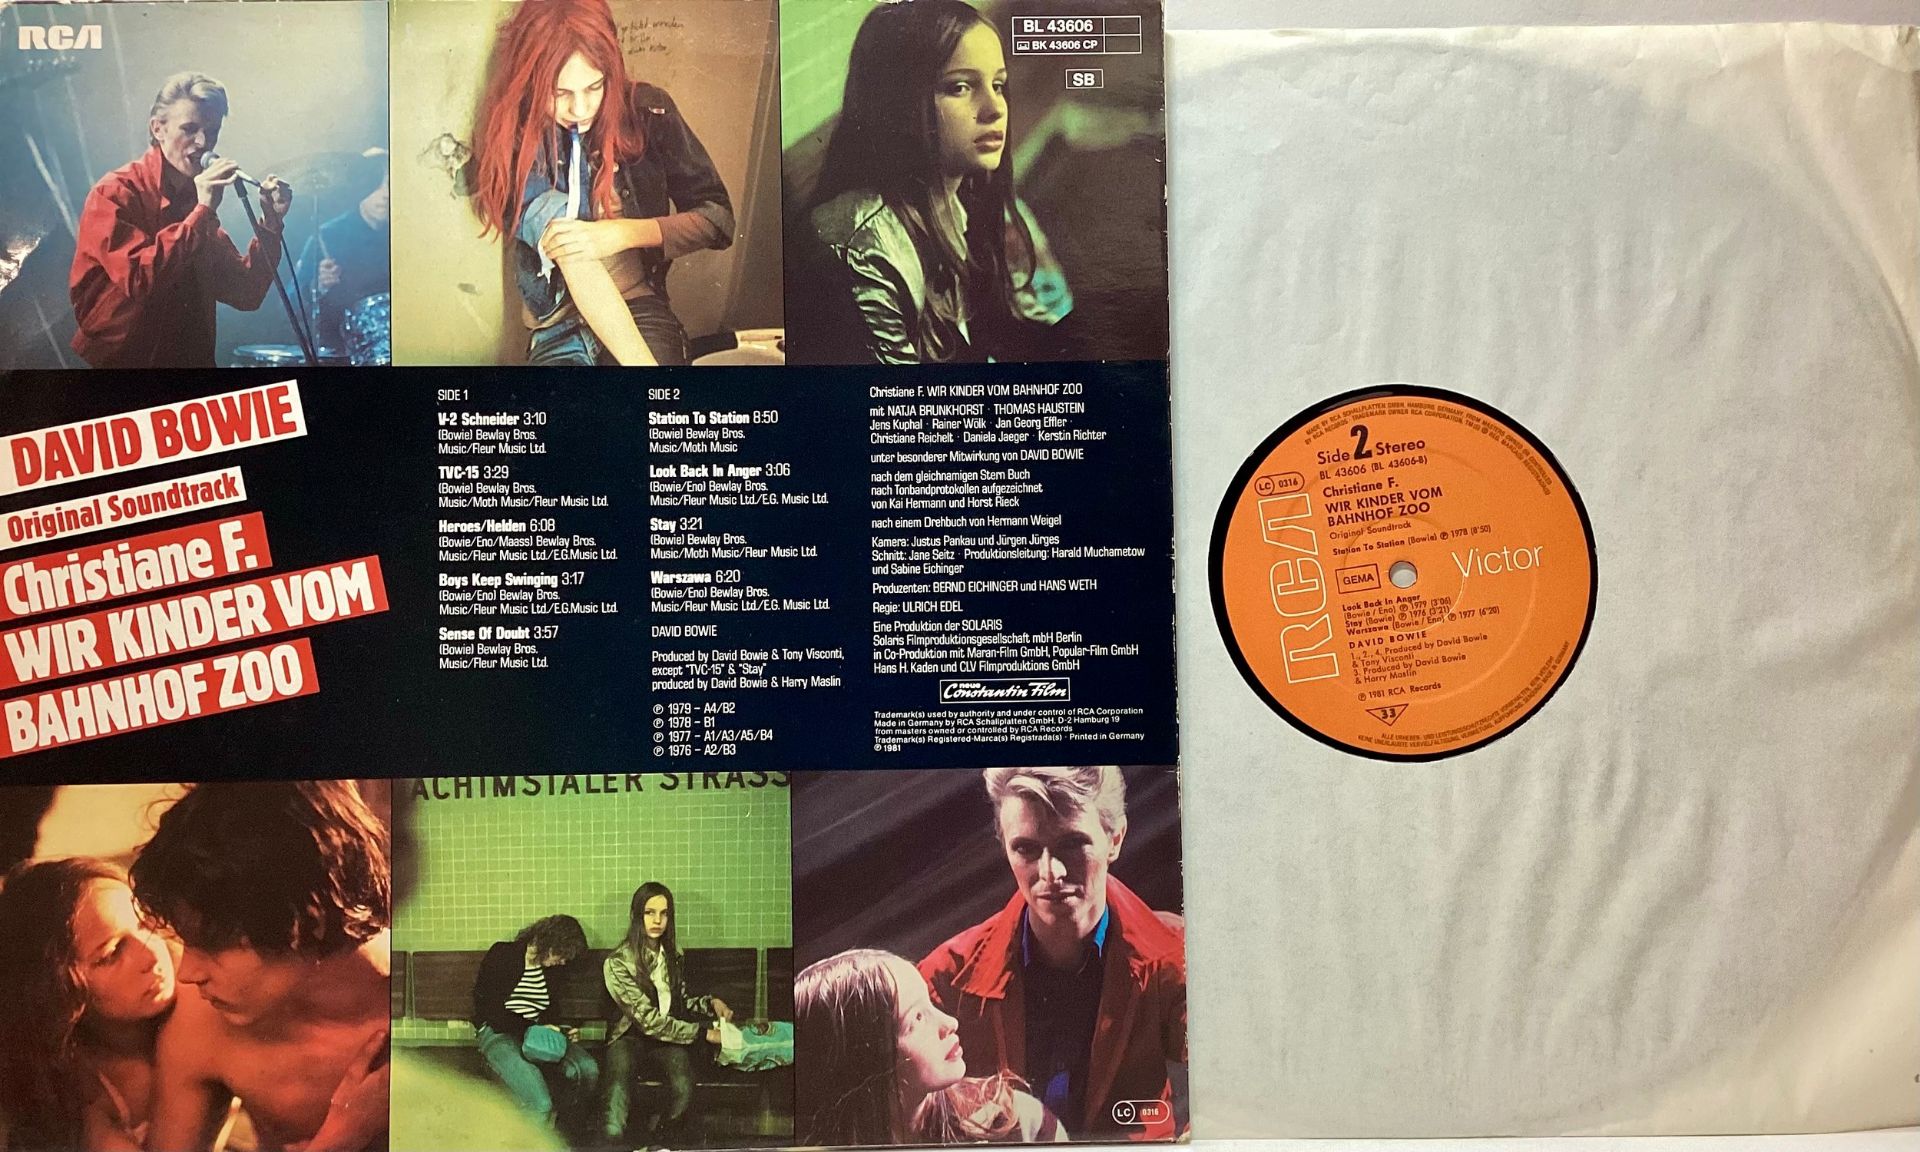 DAVID BOWIE VINYL RECORDS ‘YOUNG PERSONS GUIDE TO THE ORCHESTRA AND CHRISTIANE F’. Both vinyl albums - Image 2 of 3